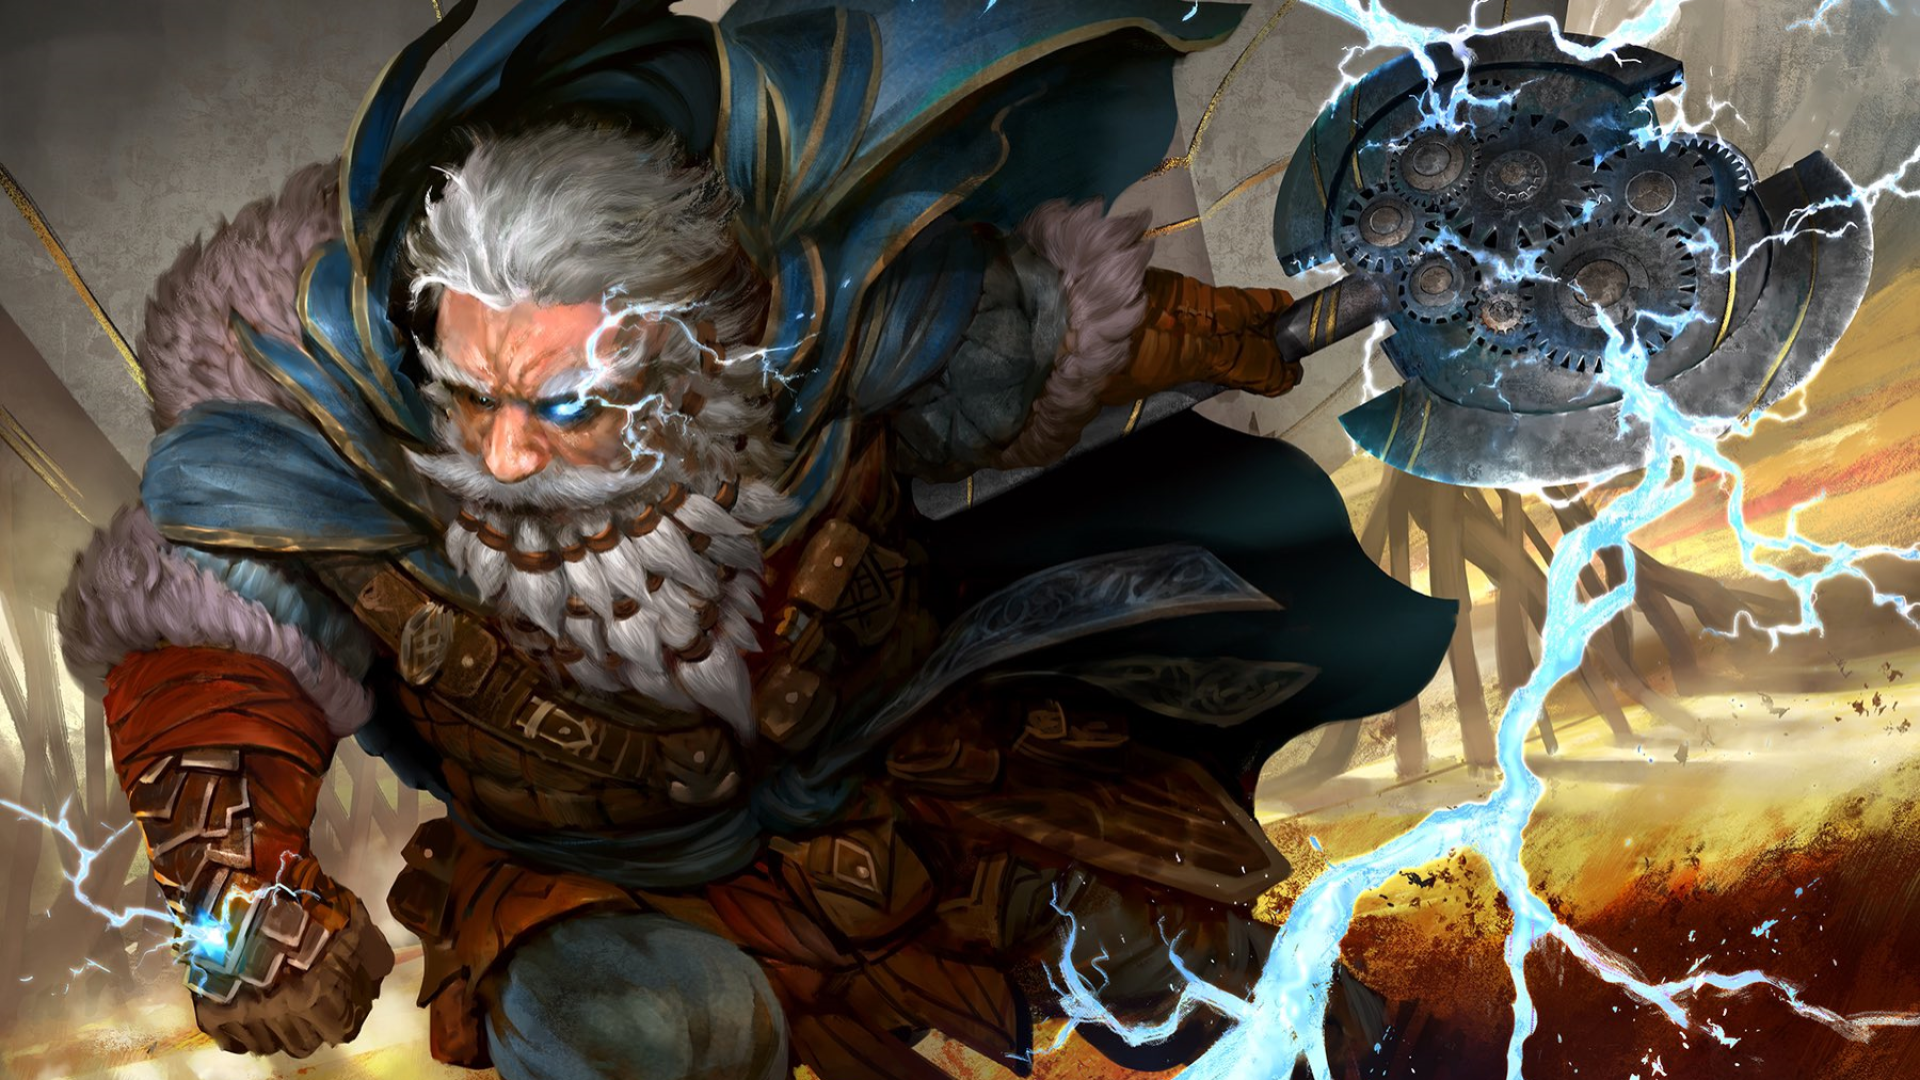 Art for MTG card Electrostatic Infantry from Dominaria United. A bearded warrior rushes into battle wielding an axe with gears at its core and lightning coursing off it.